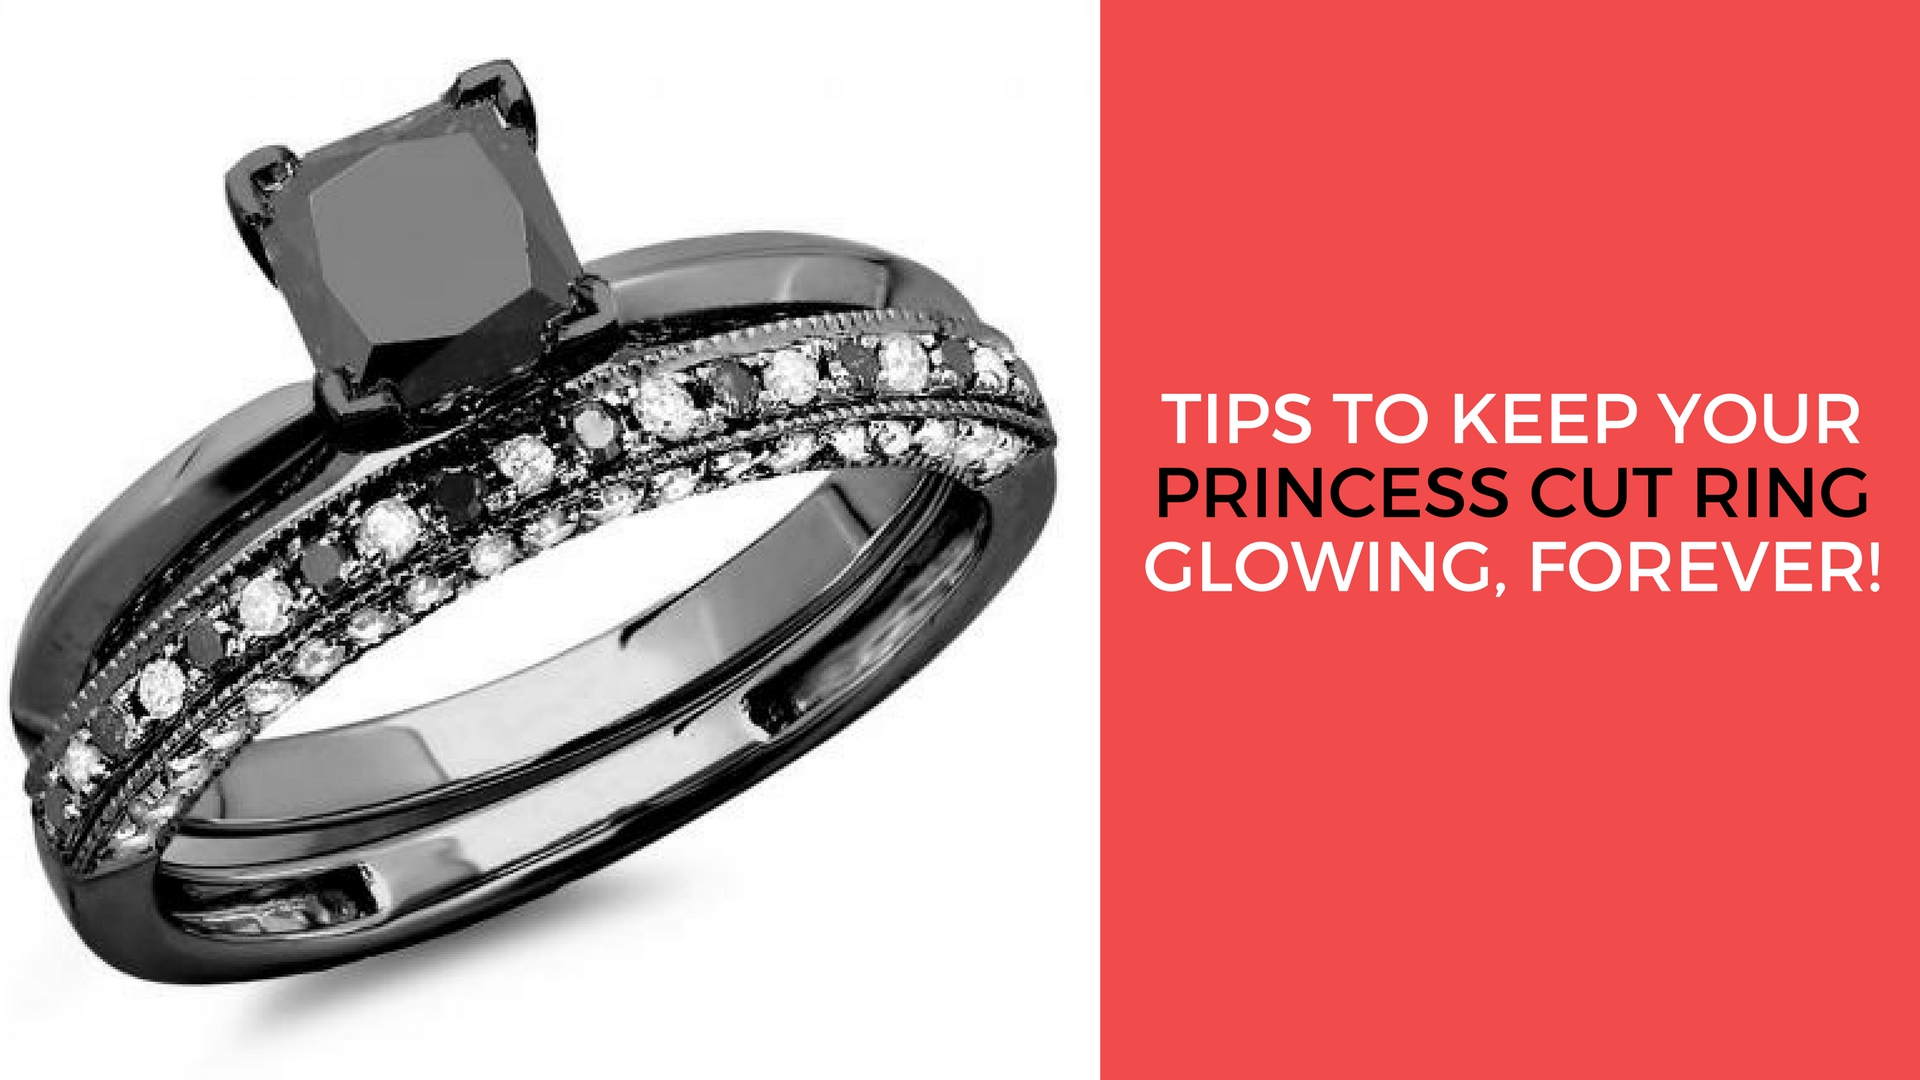 Tips To Keep Your Princess Cut Ring Glowing, Forever